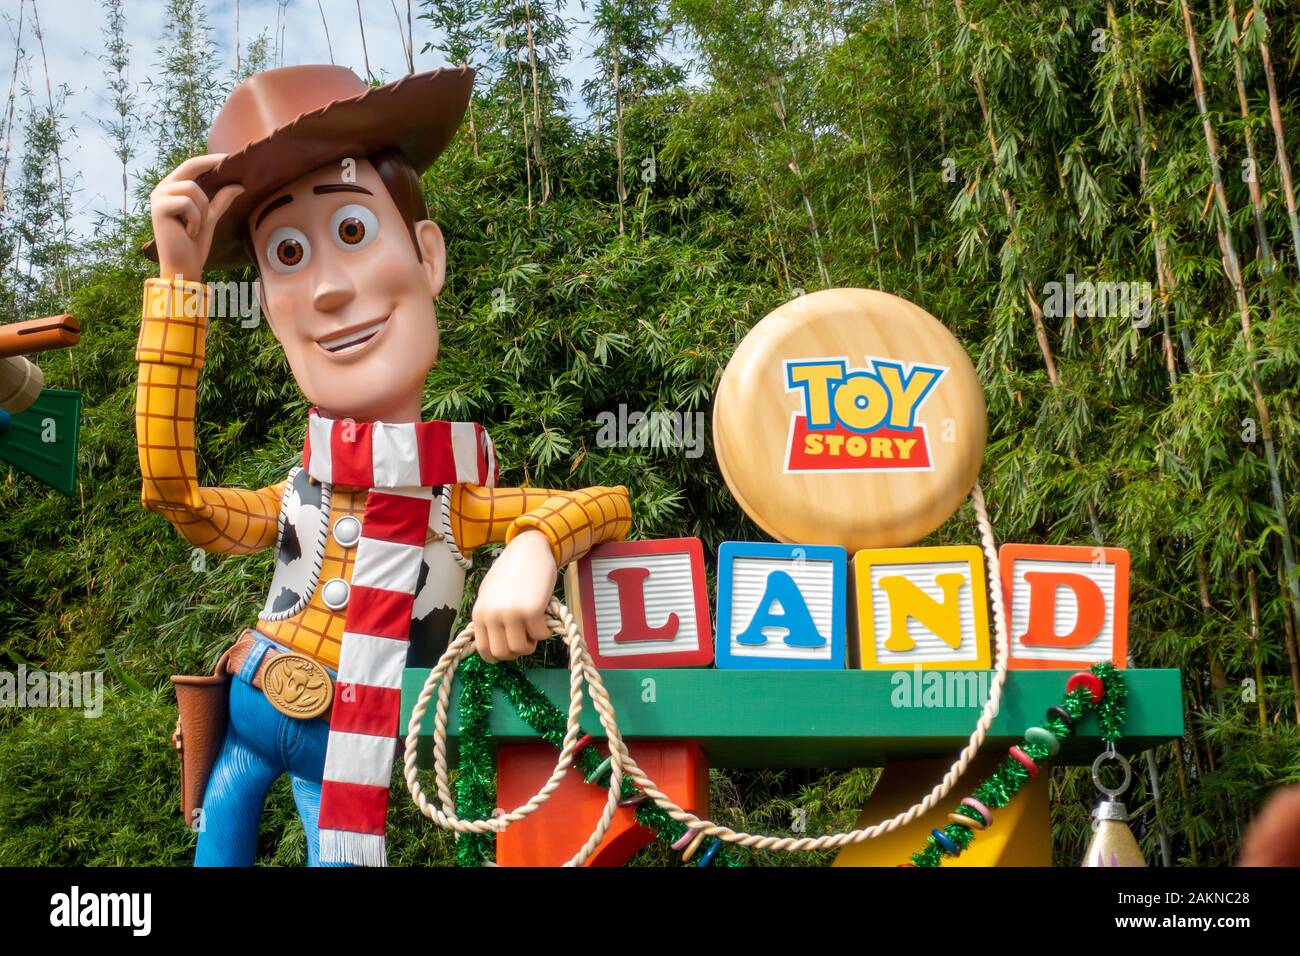 Woody from Toy Story invites guests to Toy Story World in Hollywood Studios park in Orlando Florida. Stock Photo